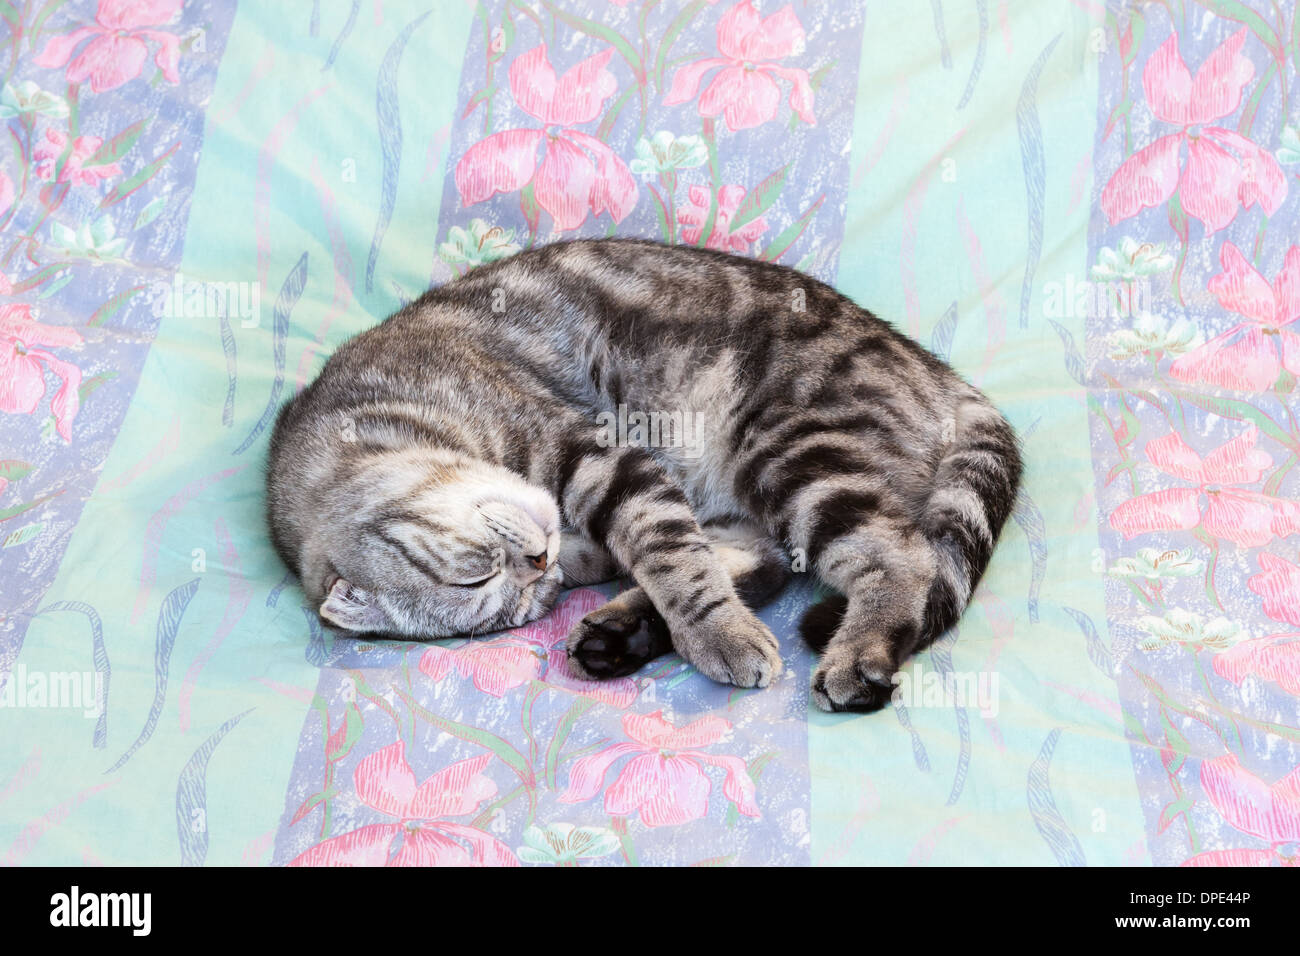 Couchage chat Scottish Fold Banque D'Images